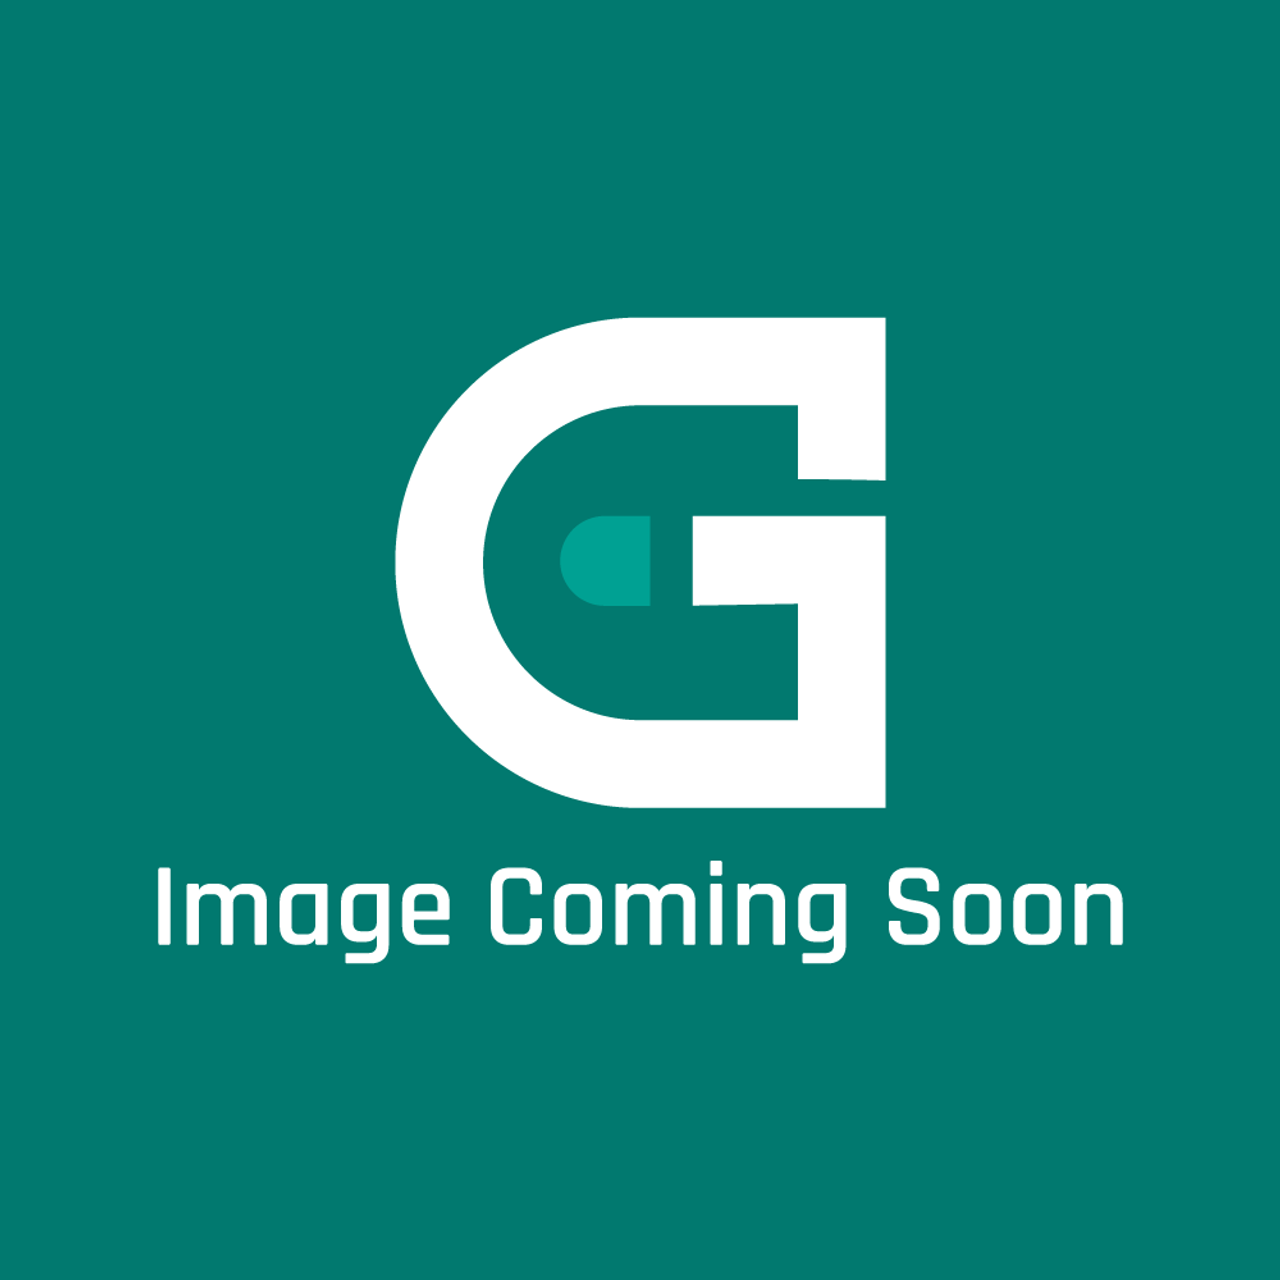 Frigidaire - Electrolux 316576300 Controller - Image Coming Soon!